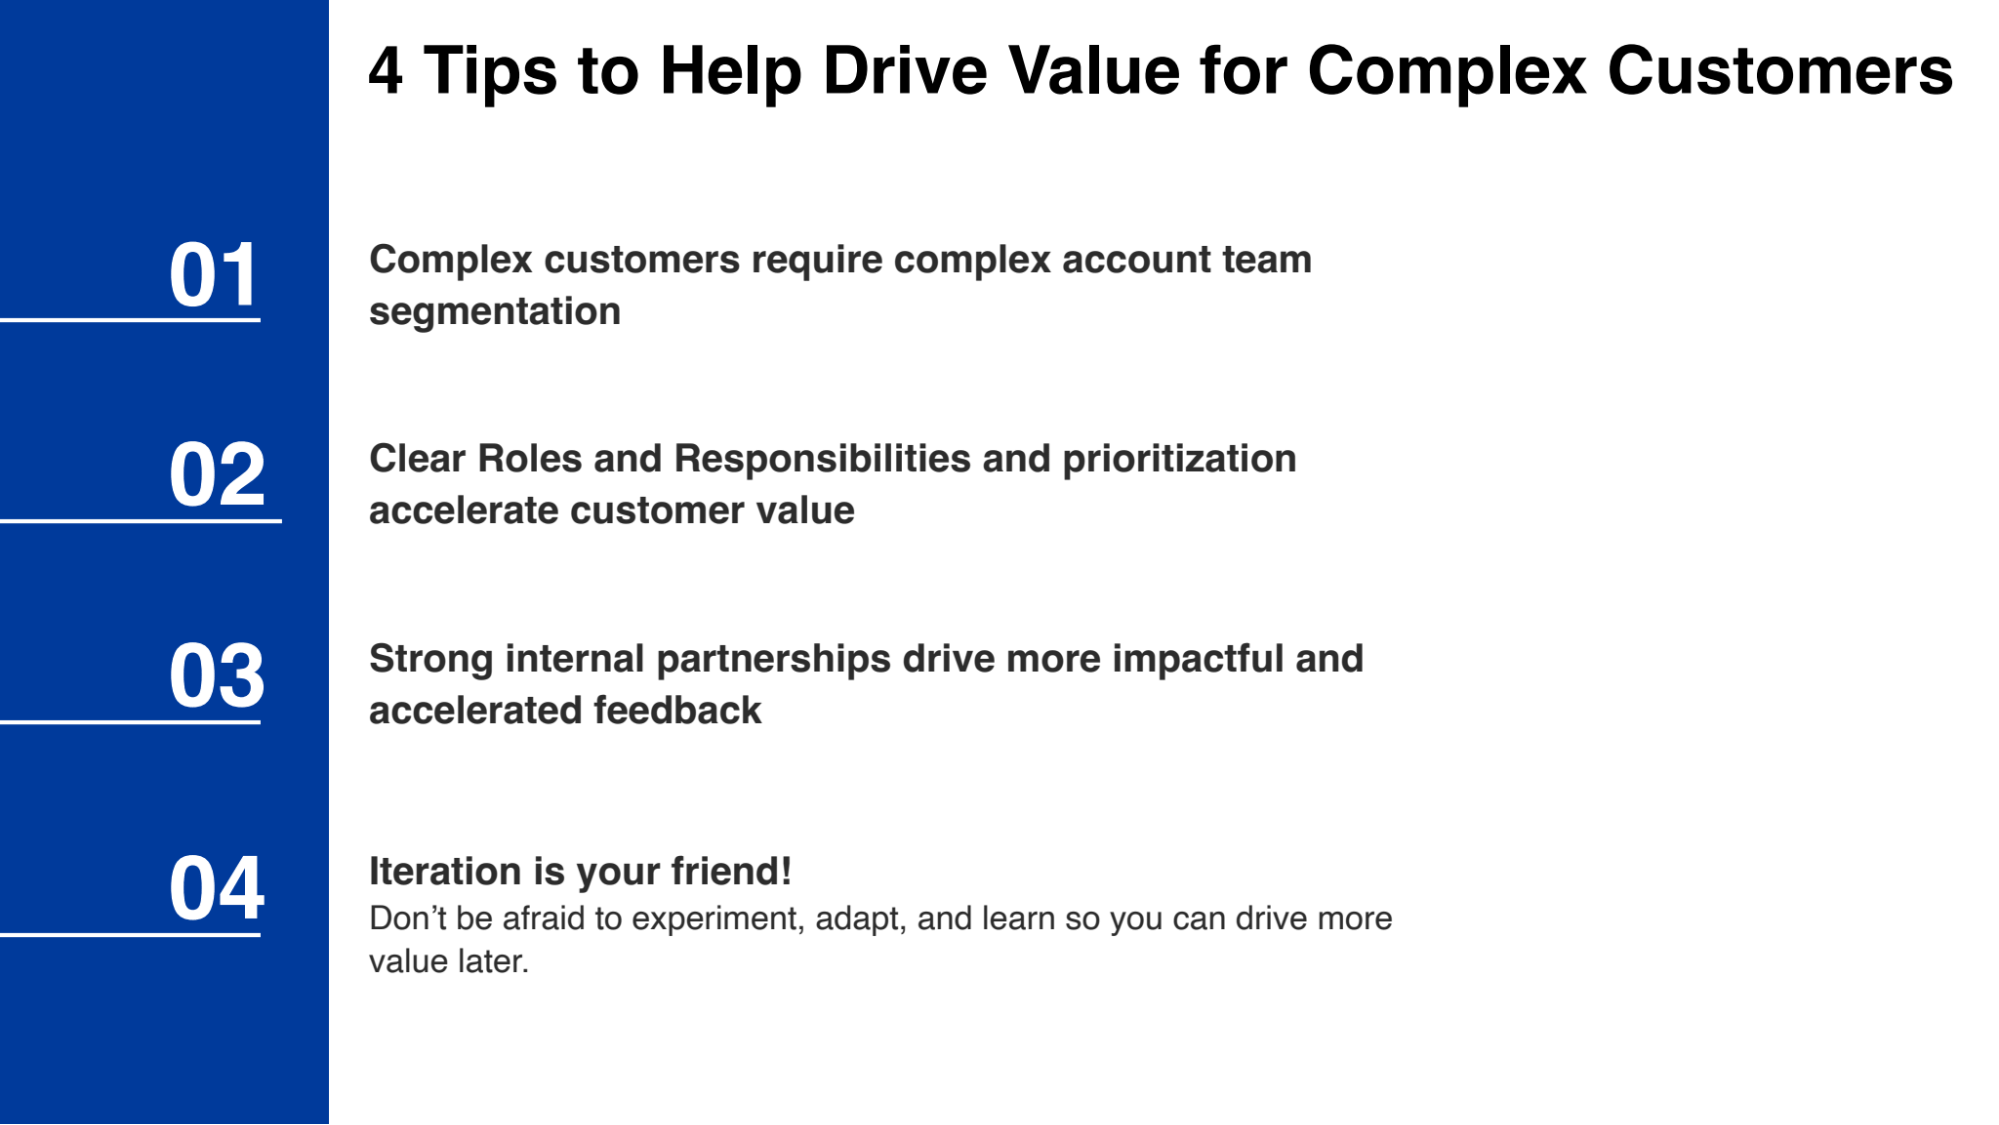 Four essential tips to help drive value for complex customers